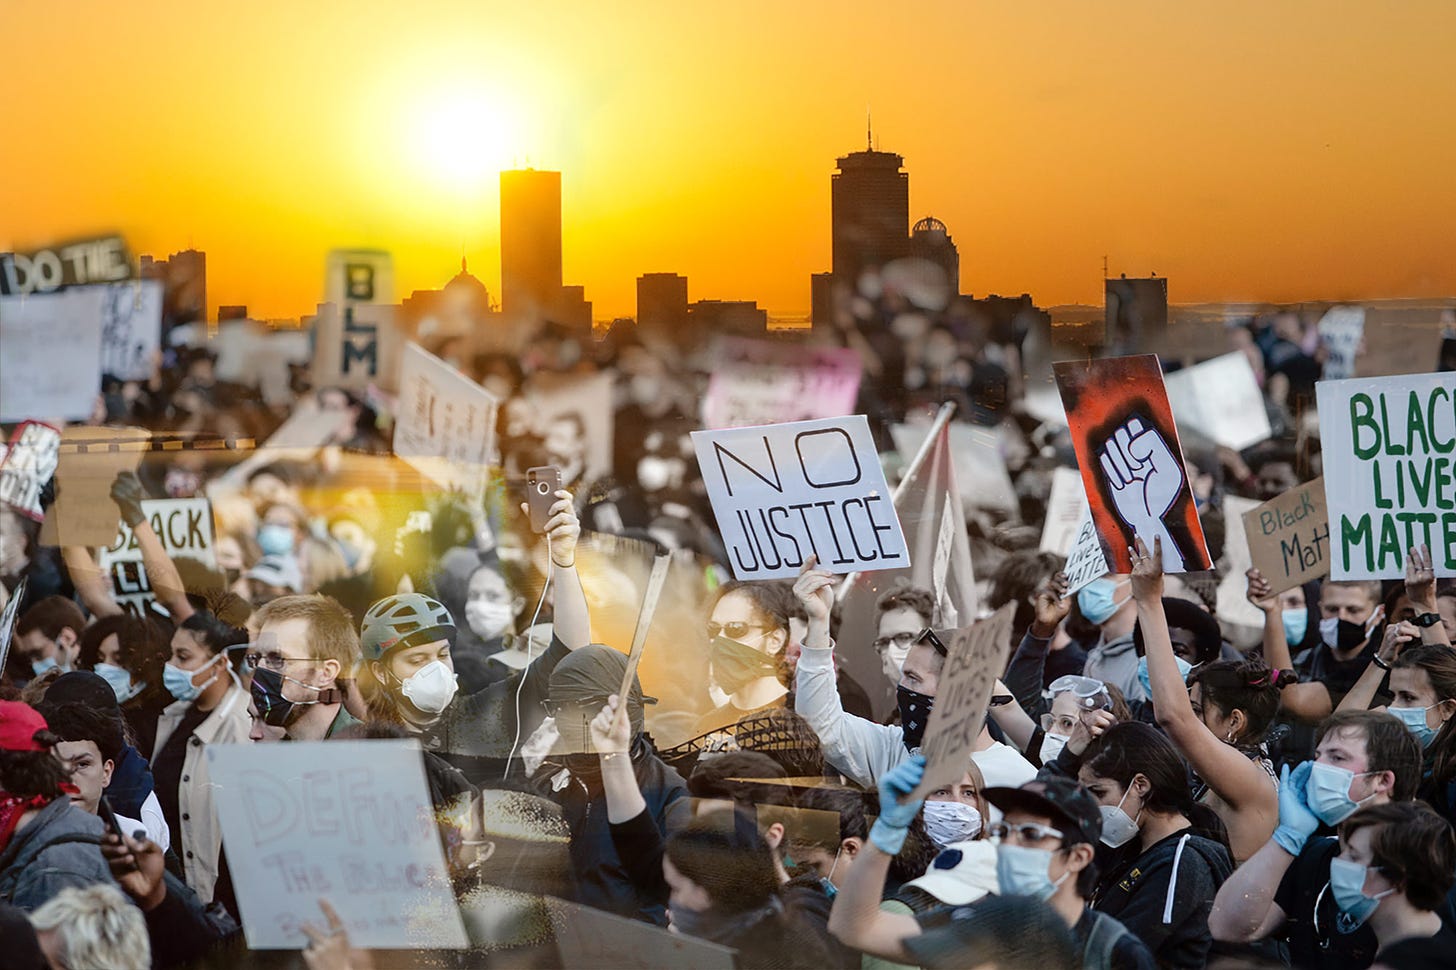 Photo of Boston protests in June 2020, screened over a photo of a sunrise of the Boston city skyline. Protesters hold signs such as "No Justice" and "BLM"